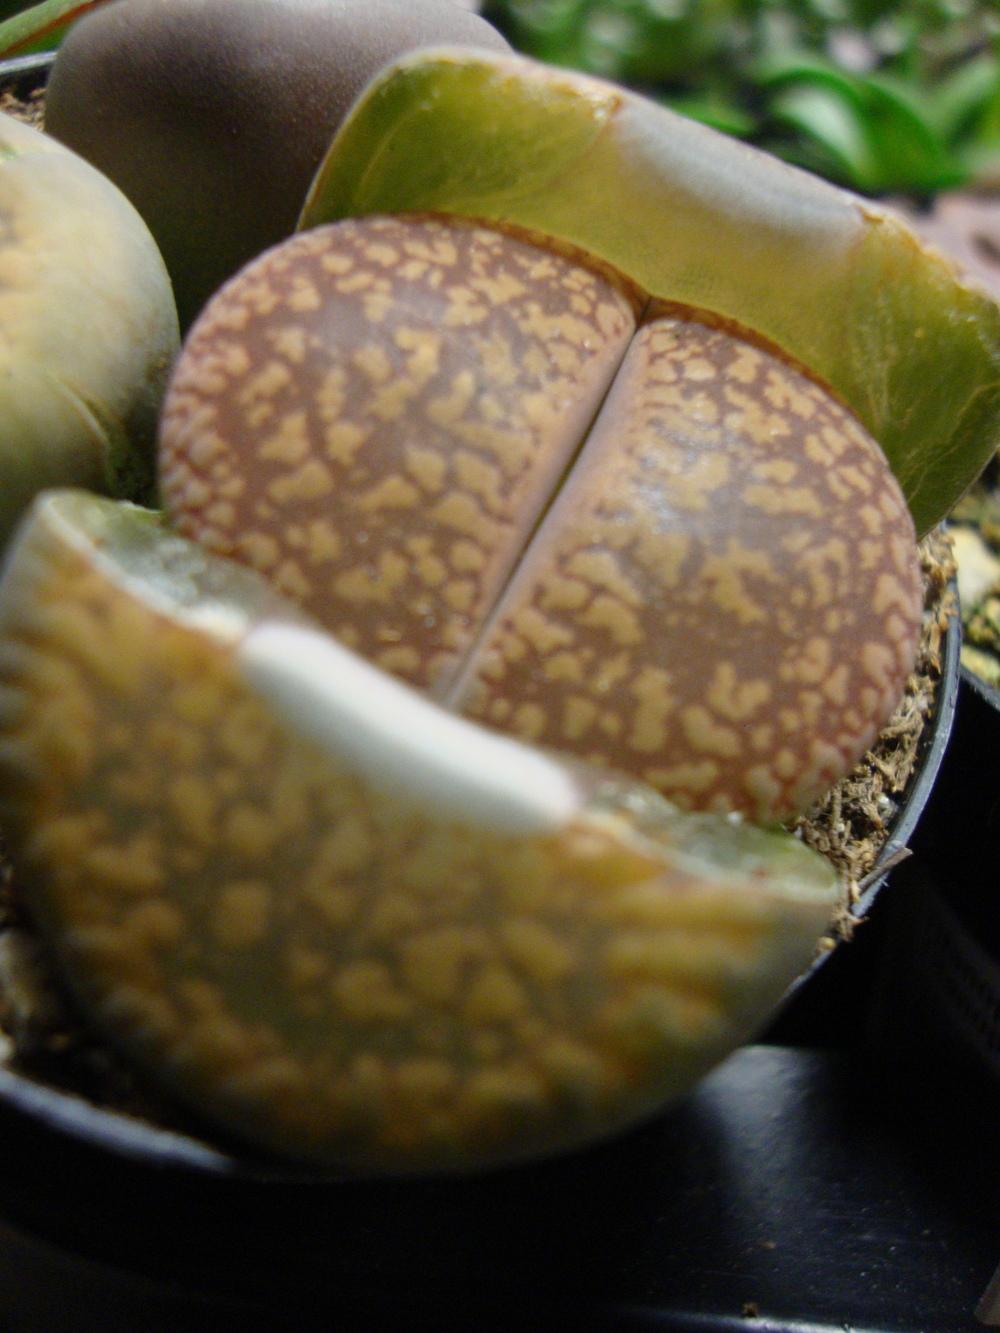 Photo of Living Stones (Lithops) uploaded by Paul2032